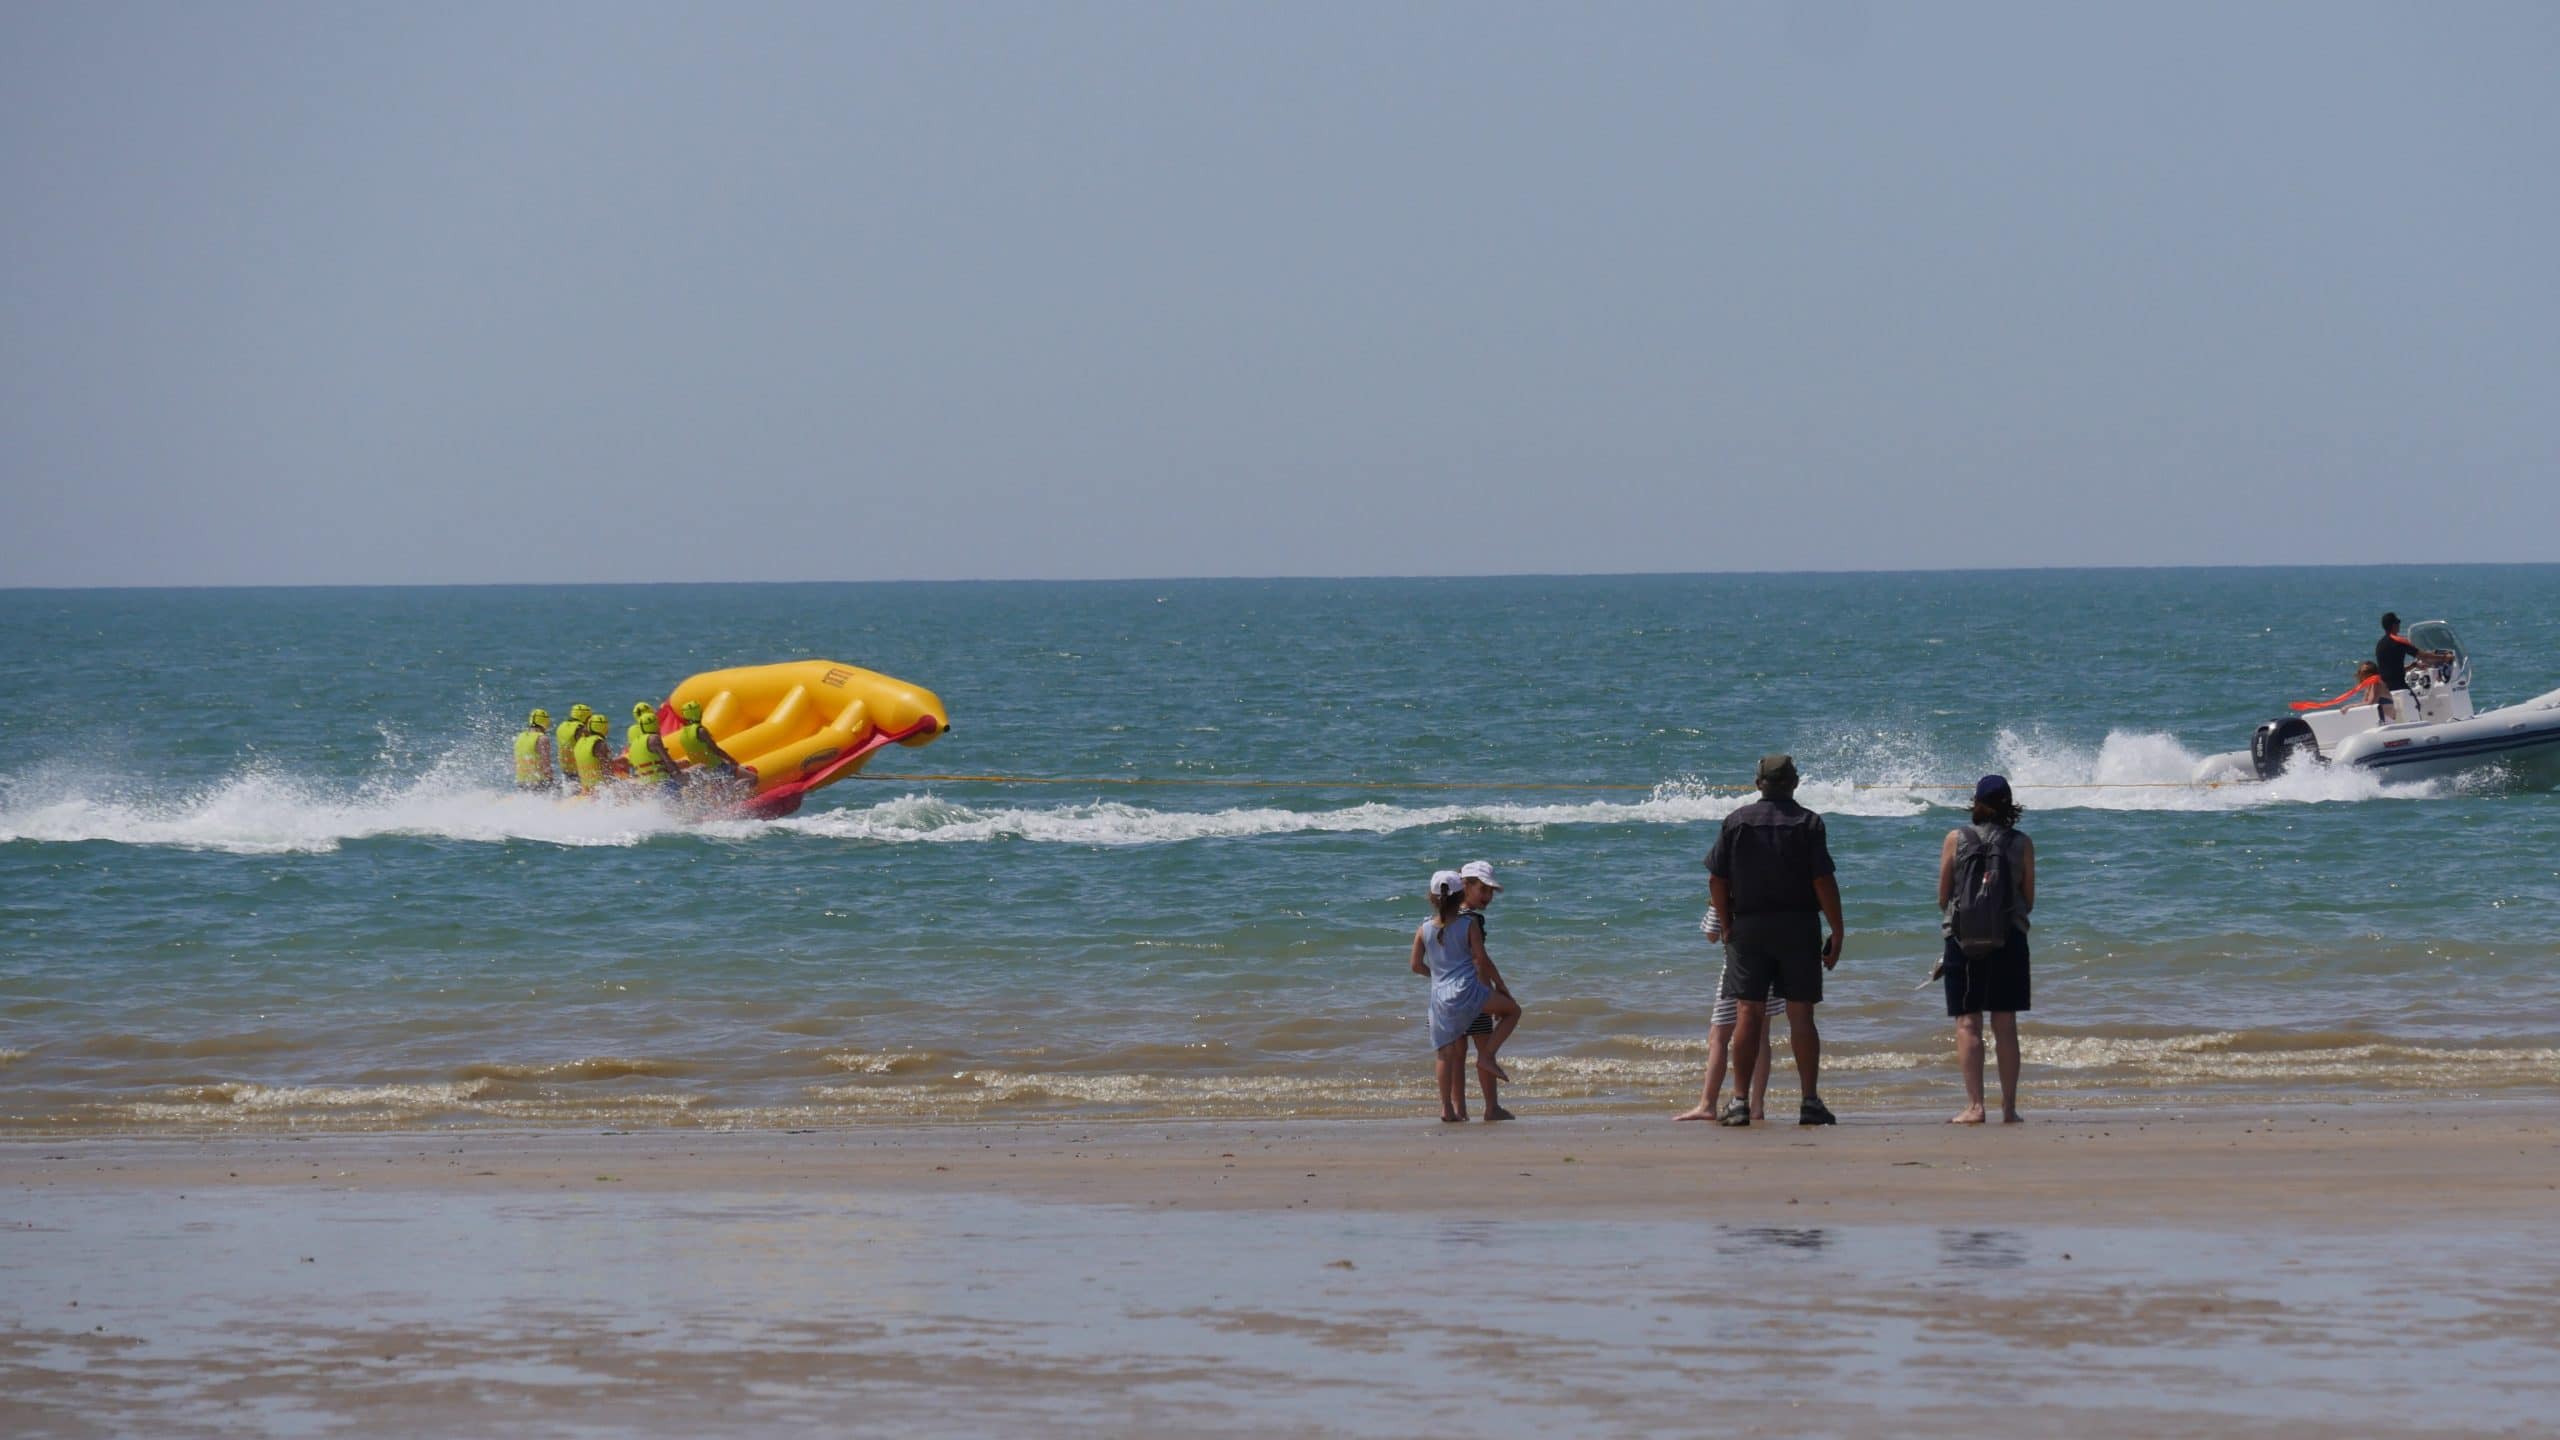 Towed inflatable rings